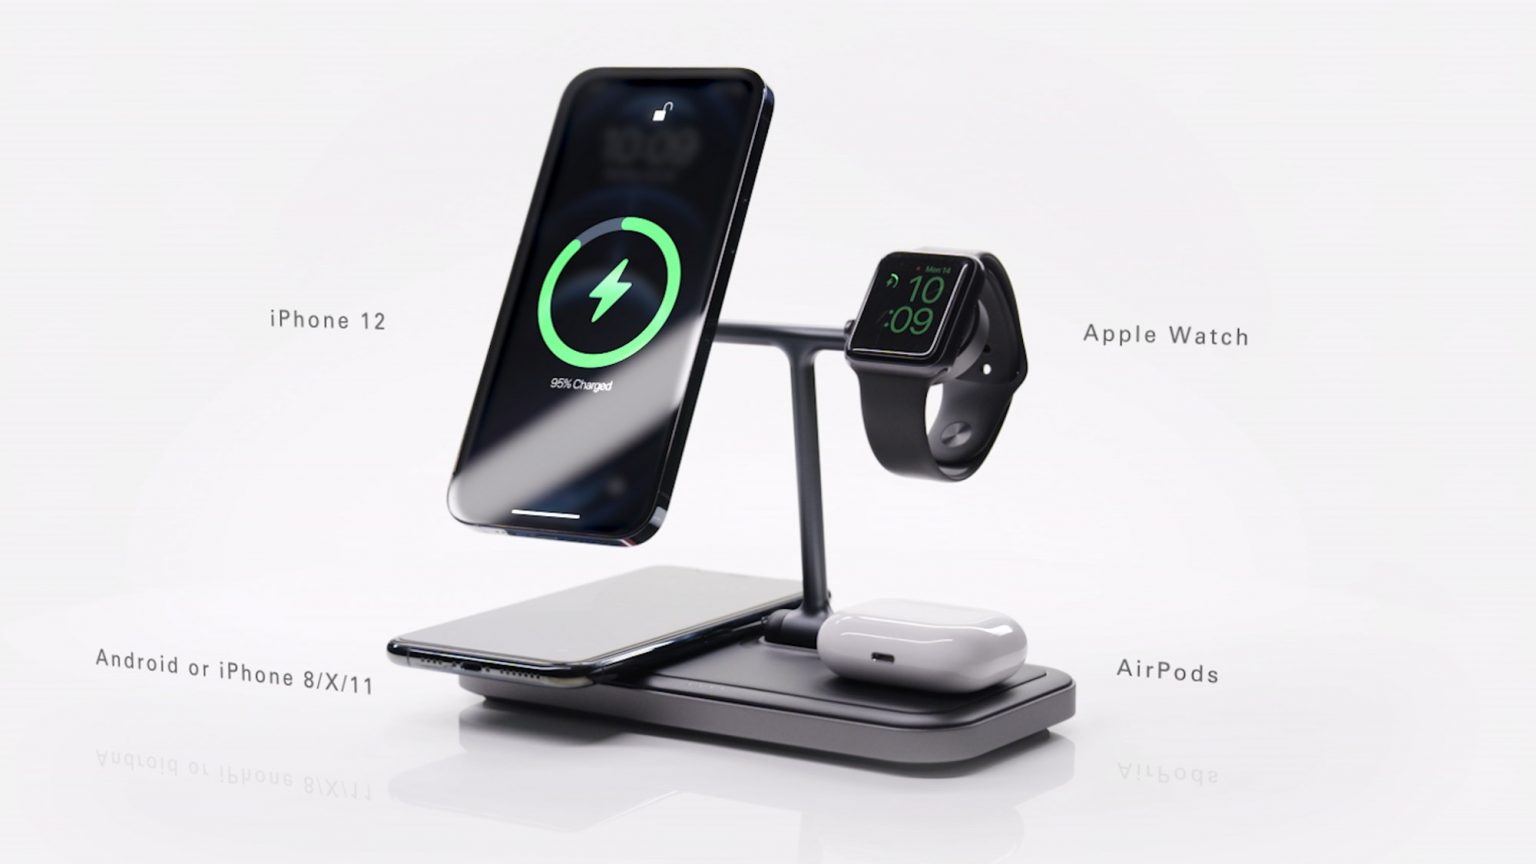 HyperJuice 4-in-1 Wireless Charging Stand folds for easy transport